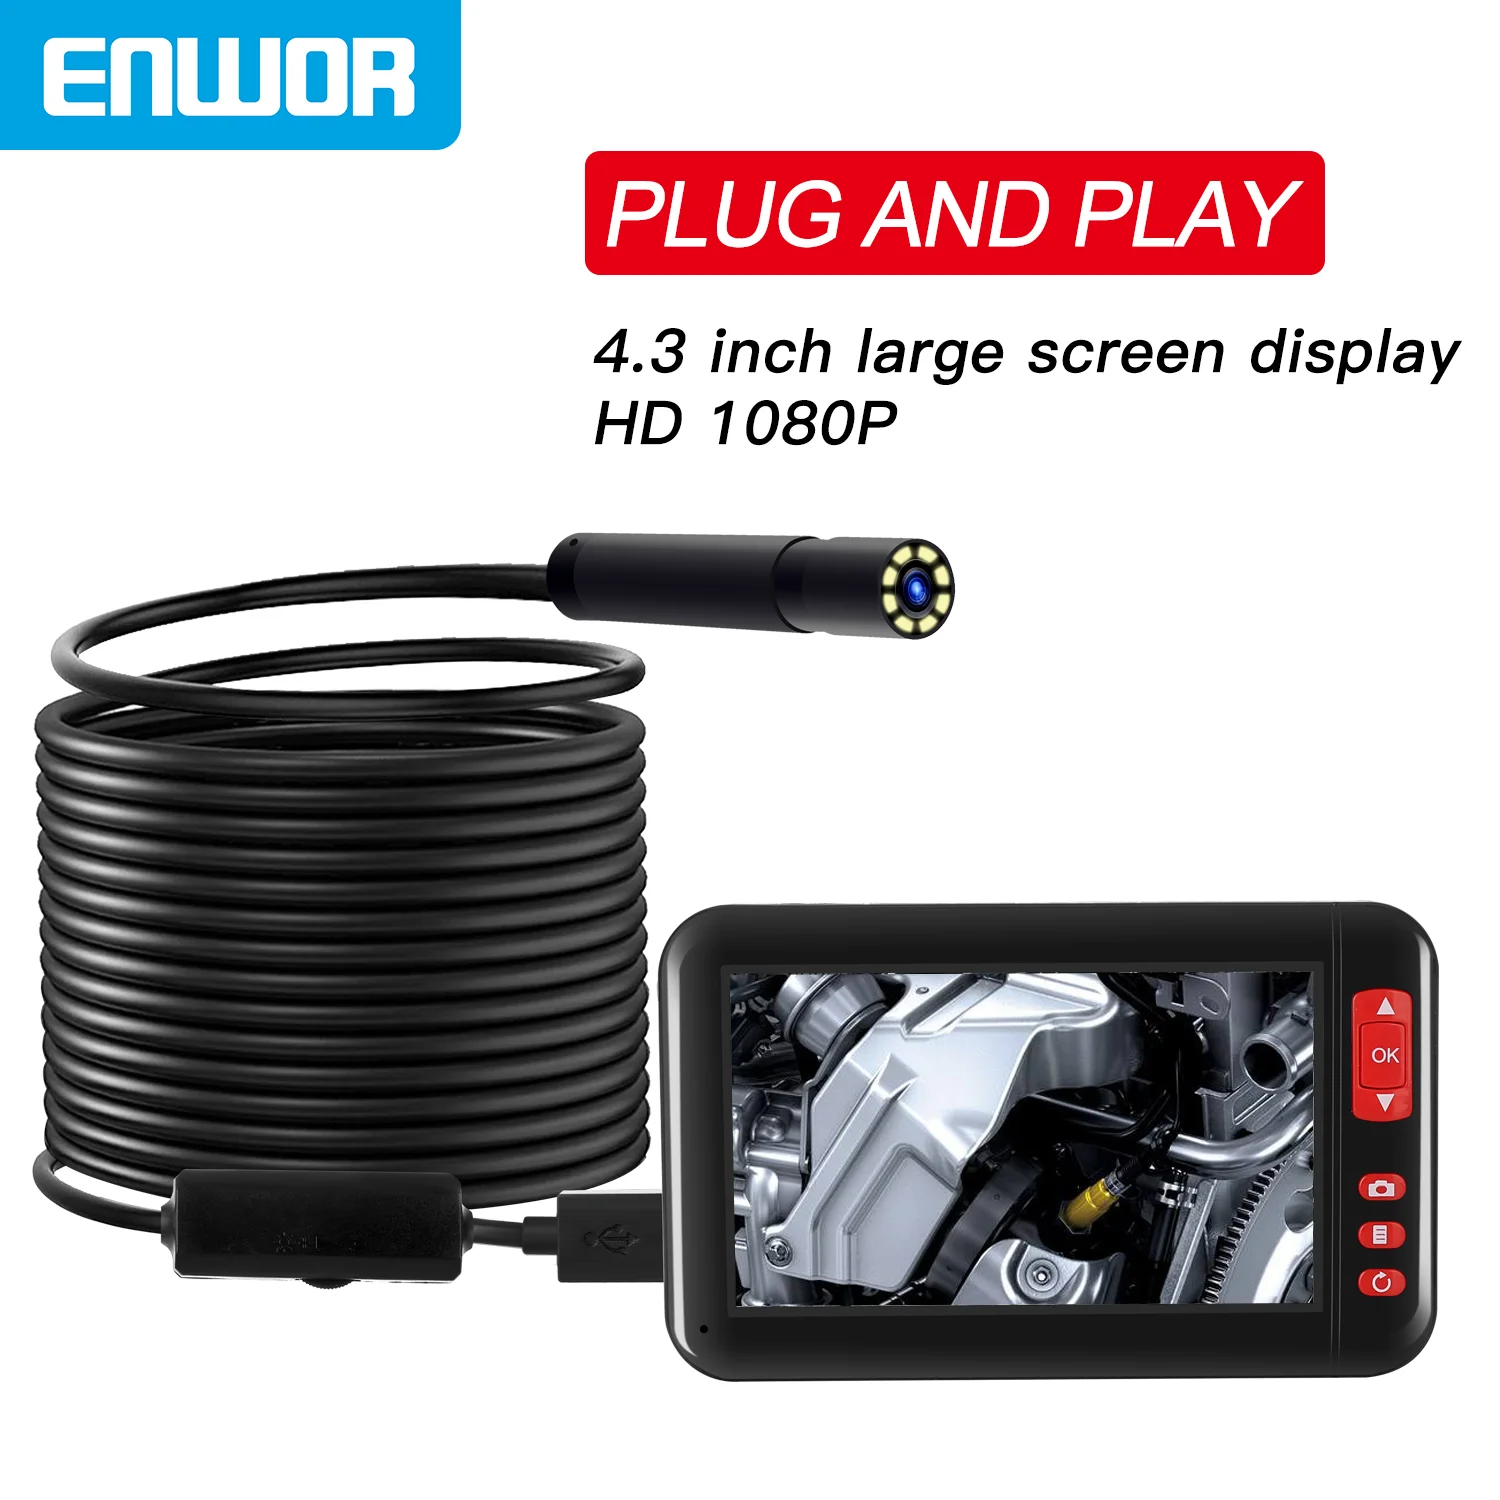 

ENWOR 8mm Industrial Endoscope Camera 4.3" 1080P HD Screen IP67 Waterproof Lens Inspection Borescope for Car Engine Sewer